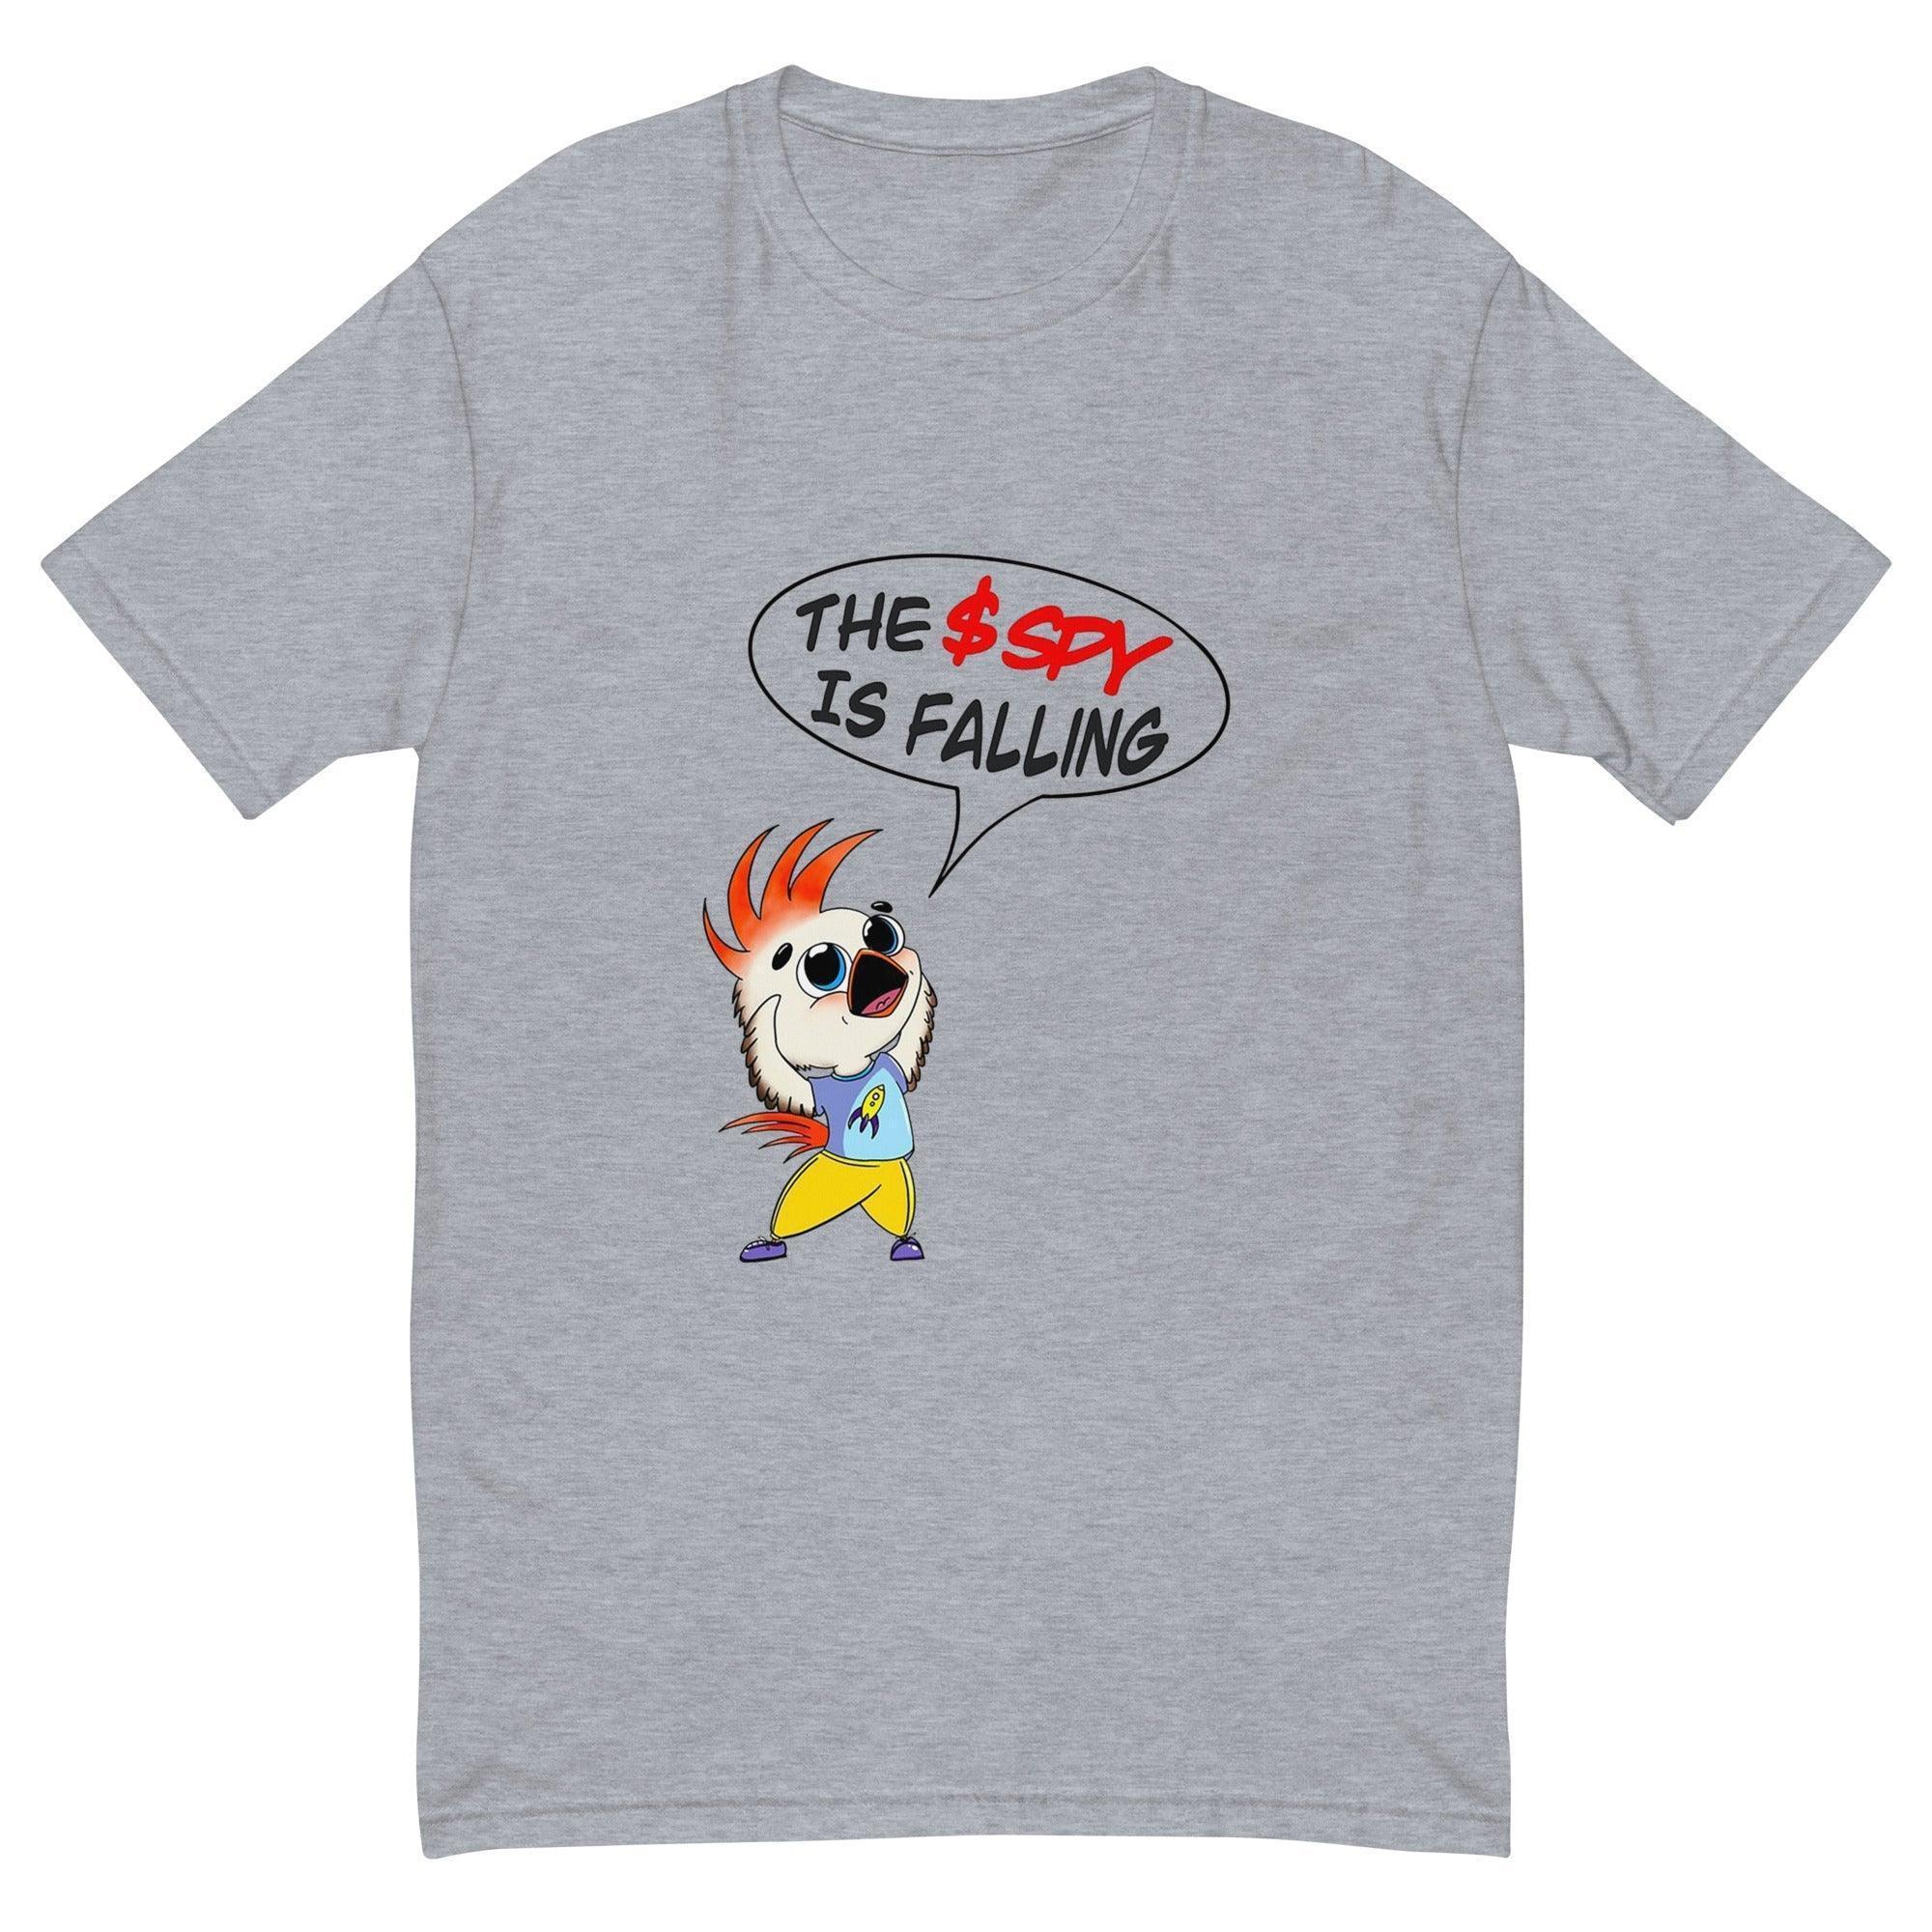 The SPY Is Falling T-Shirt - InvestmenTees